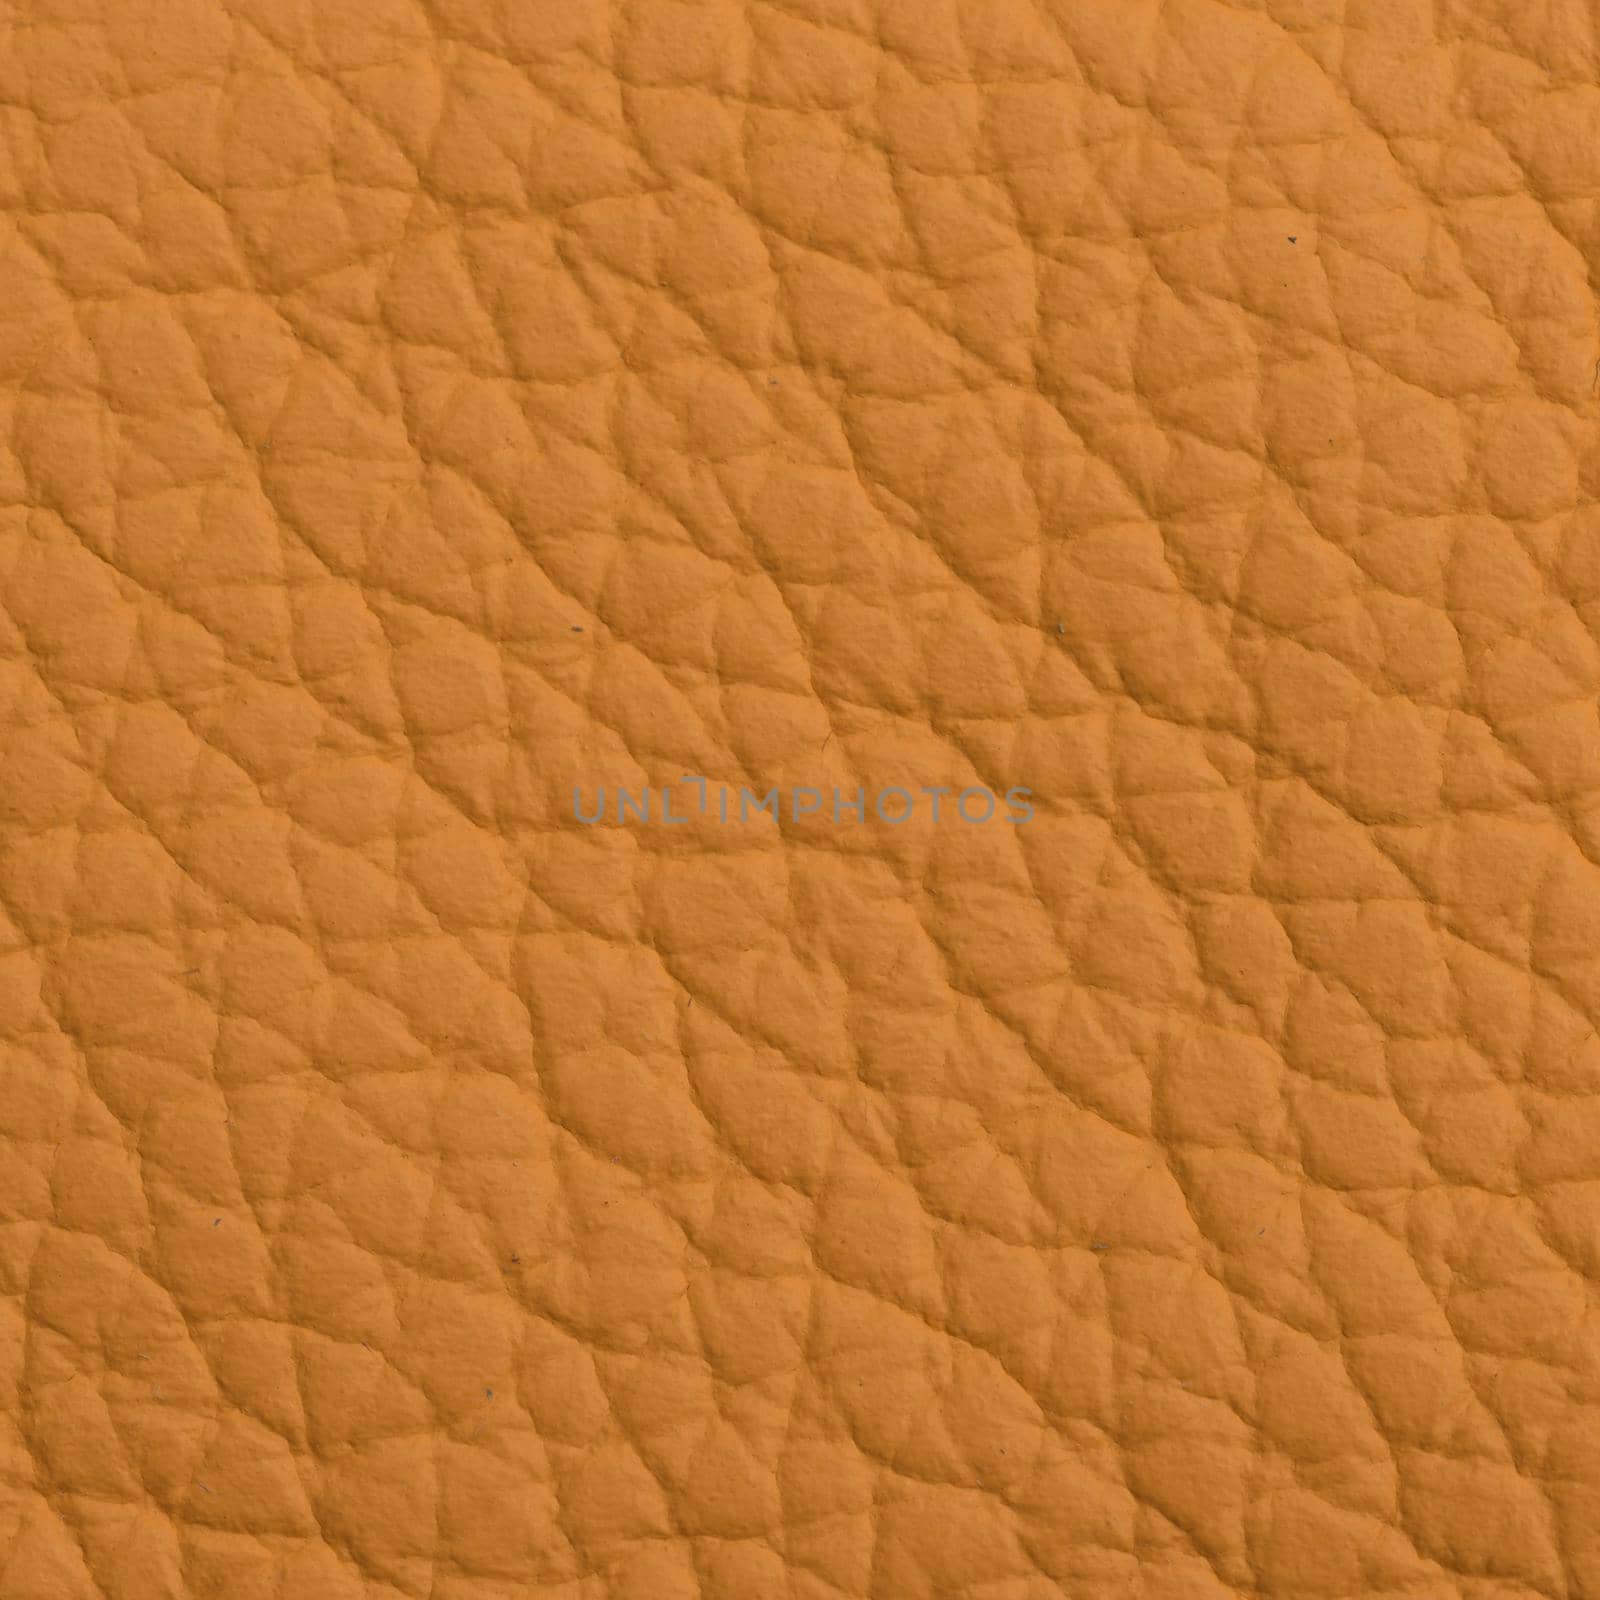 Yellow Leather texture closeup macro shot for background